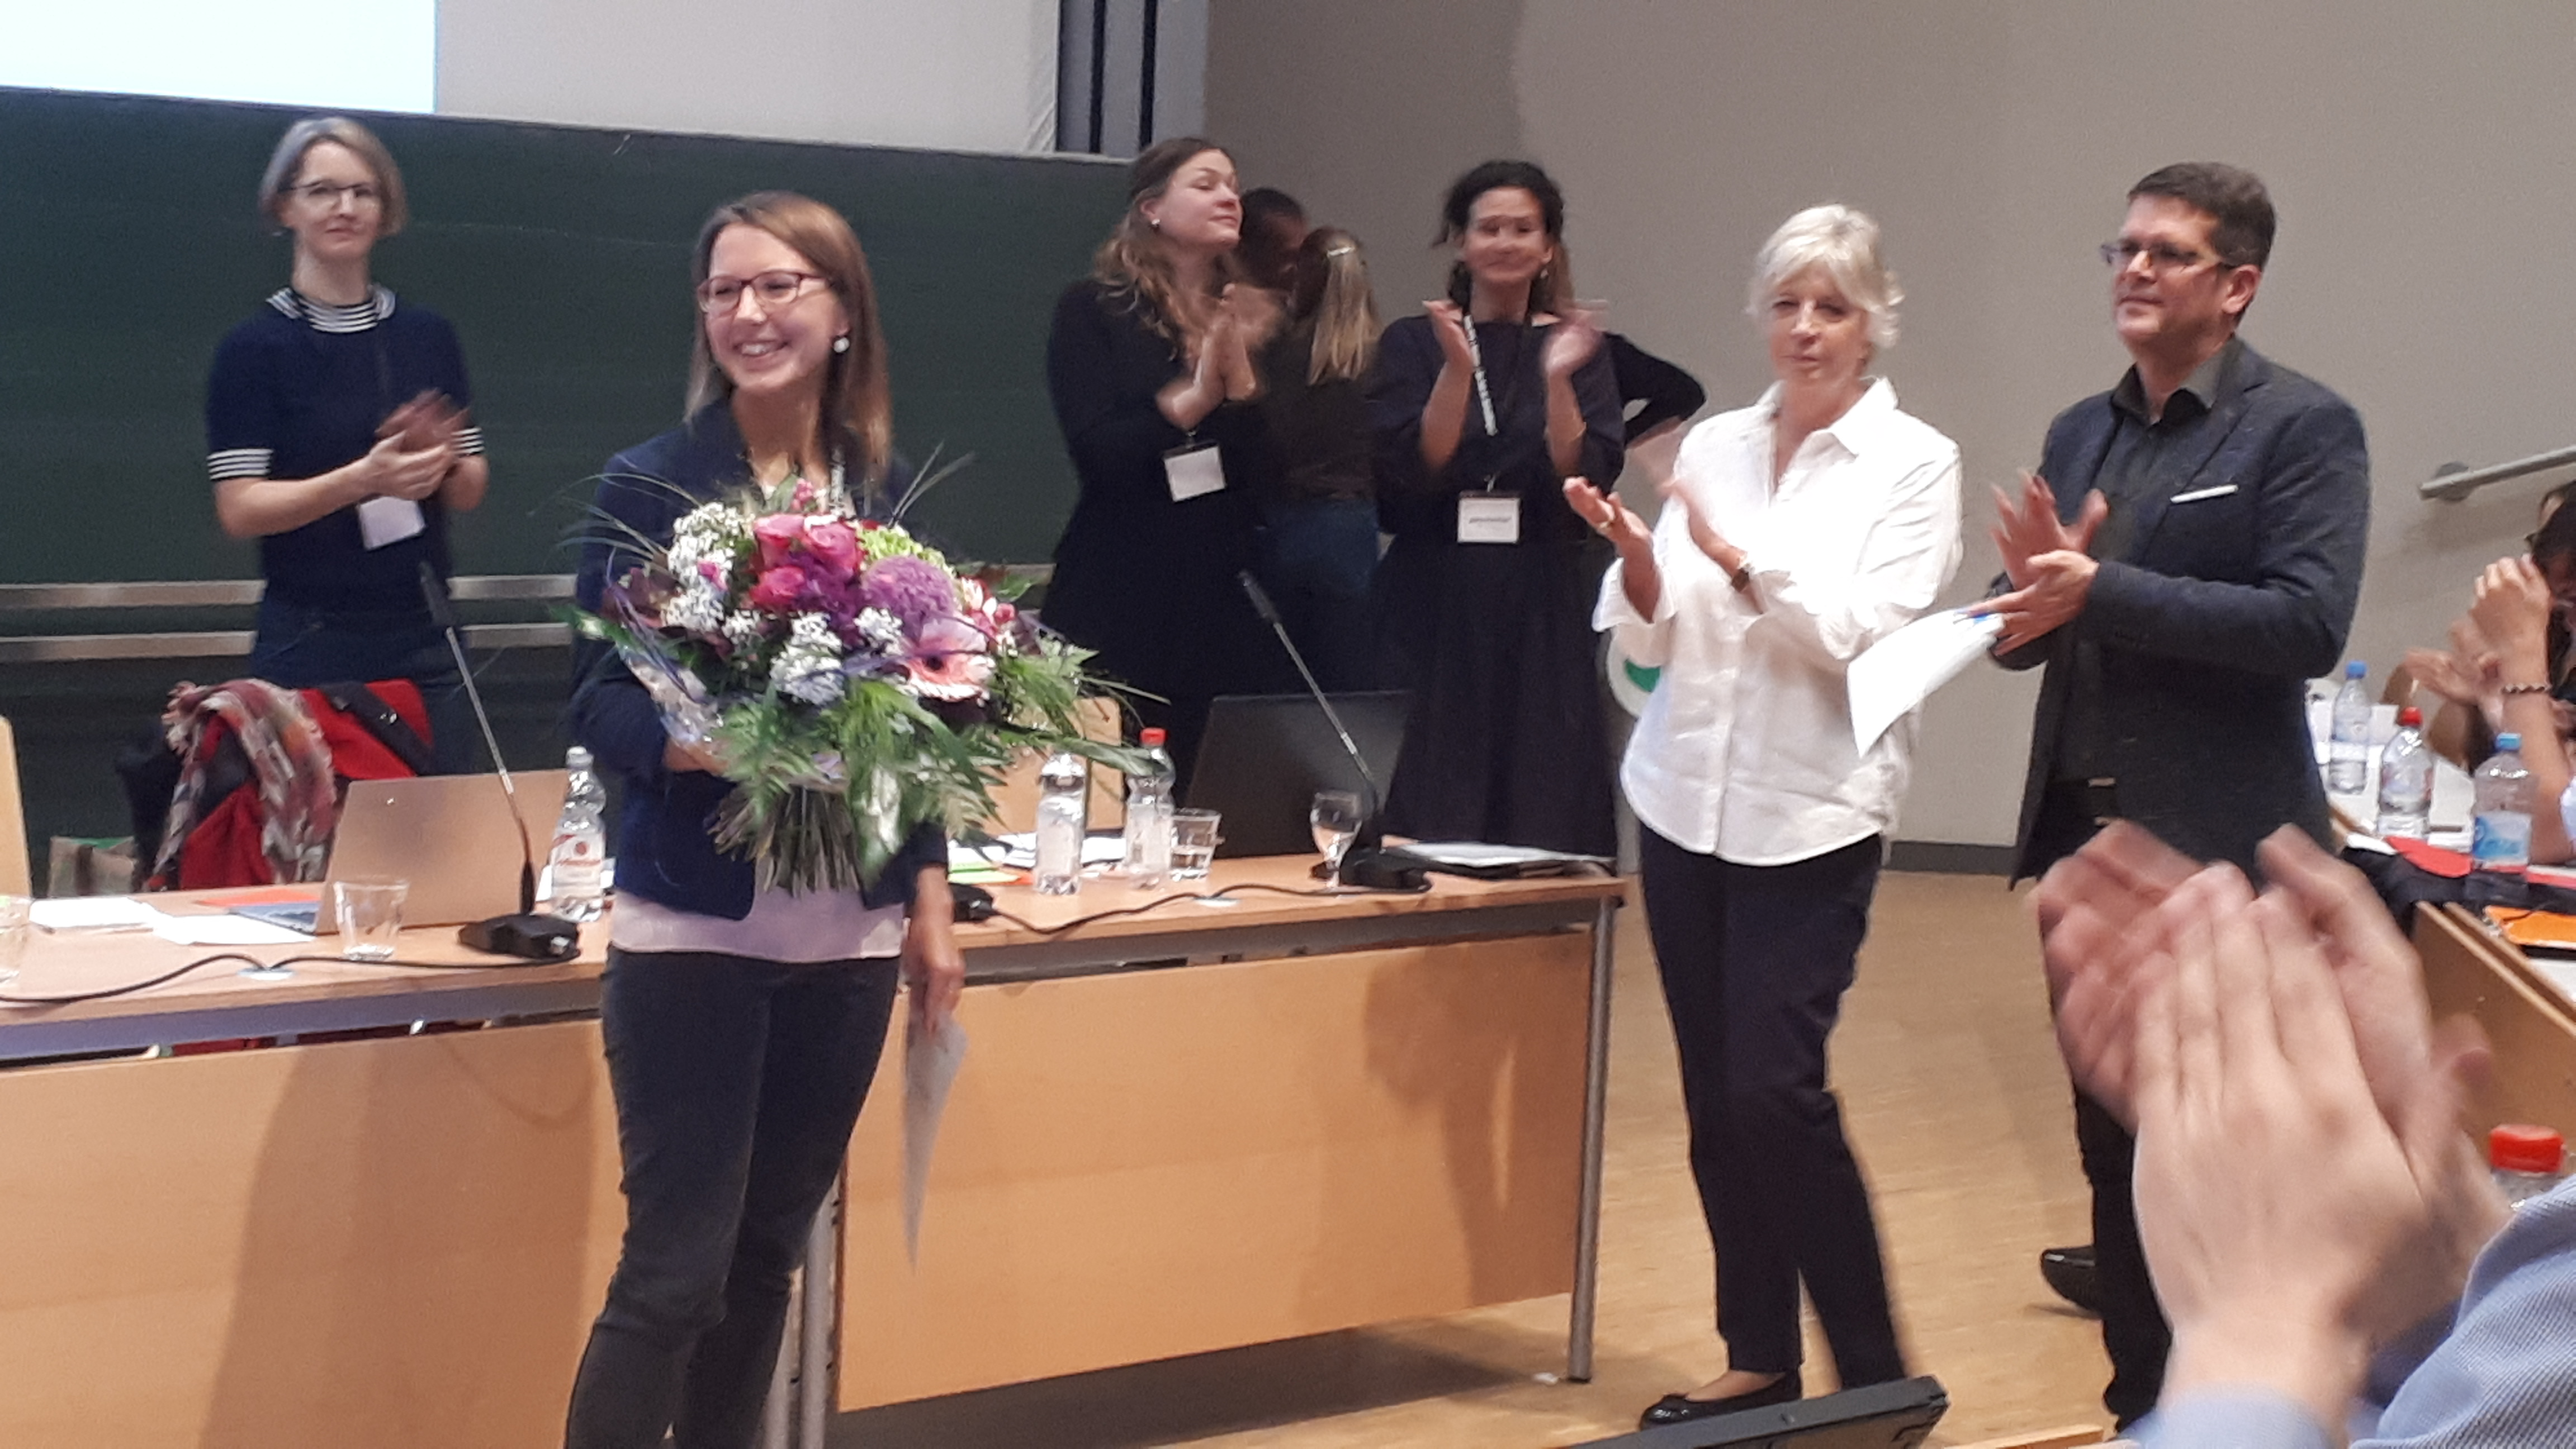 Dissertation Prize for Mirjam Lücking. German Anthropological Association gives distinction to thesis on the “Arabic world” of Indonesia